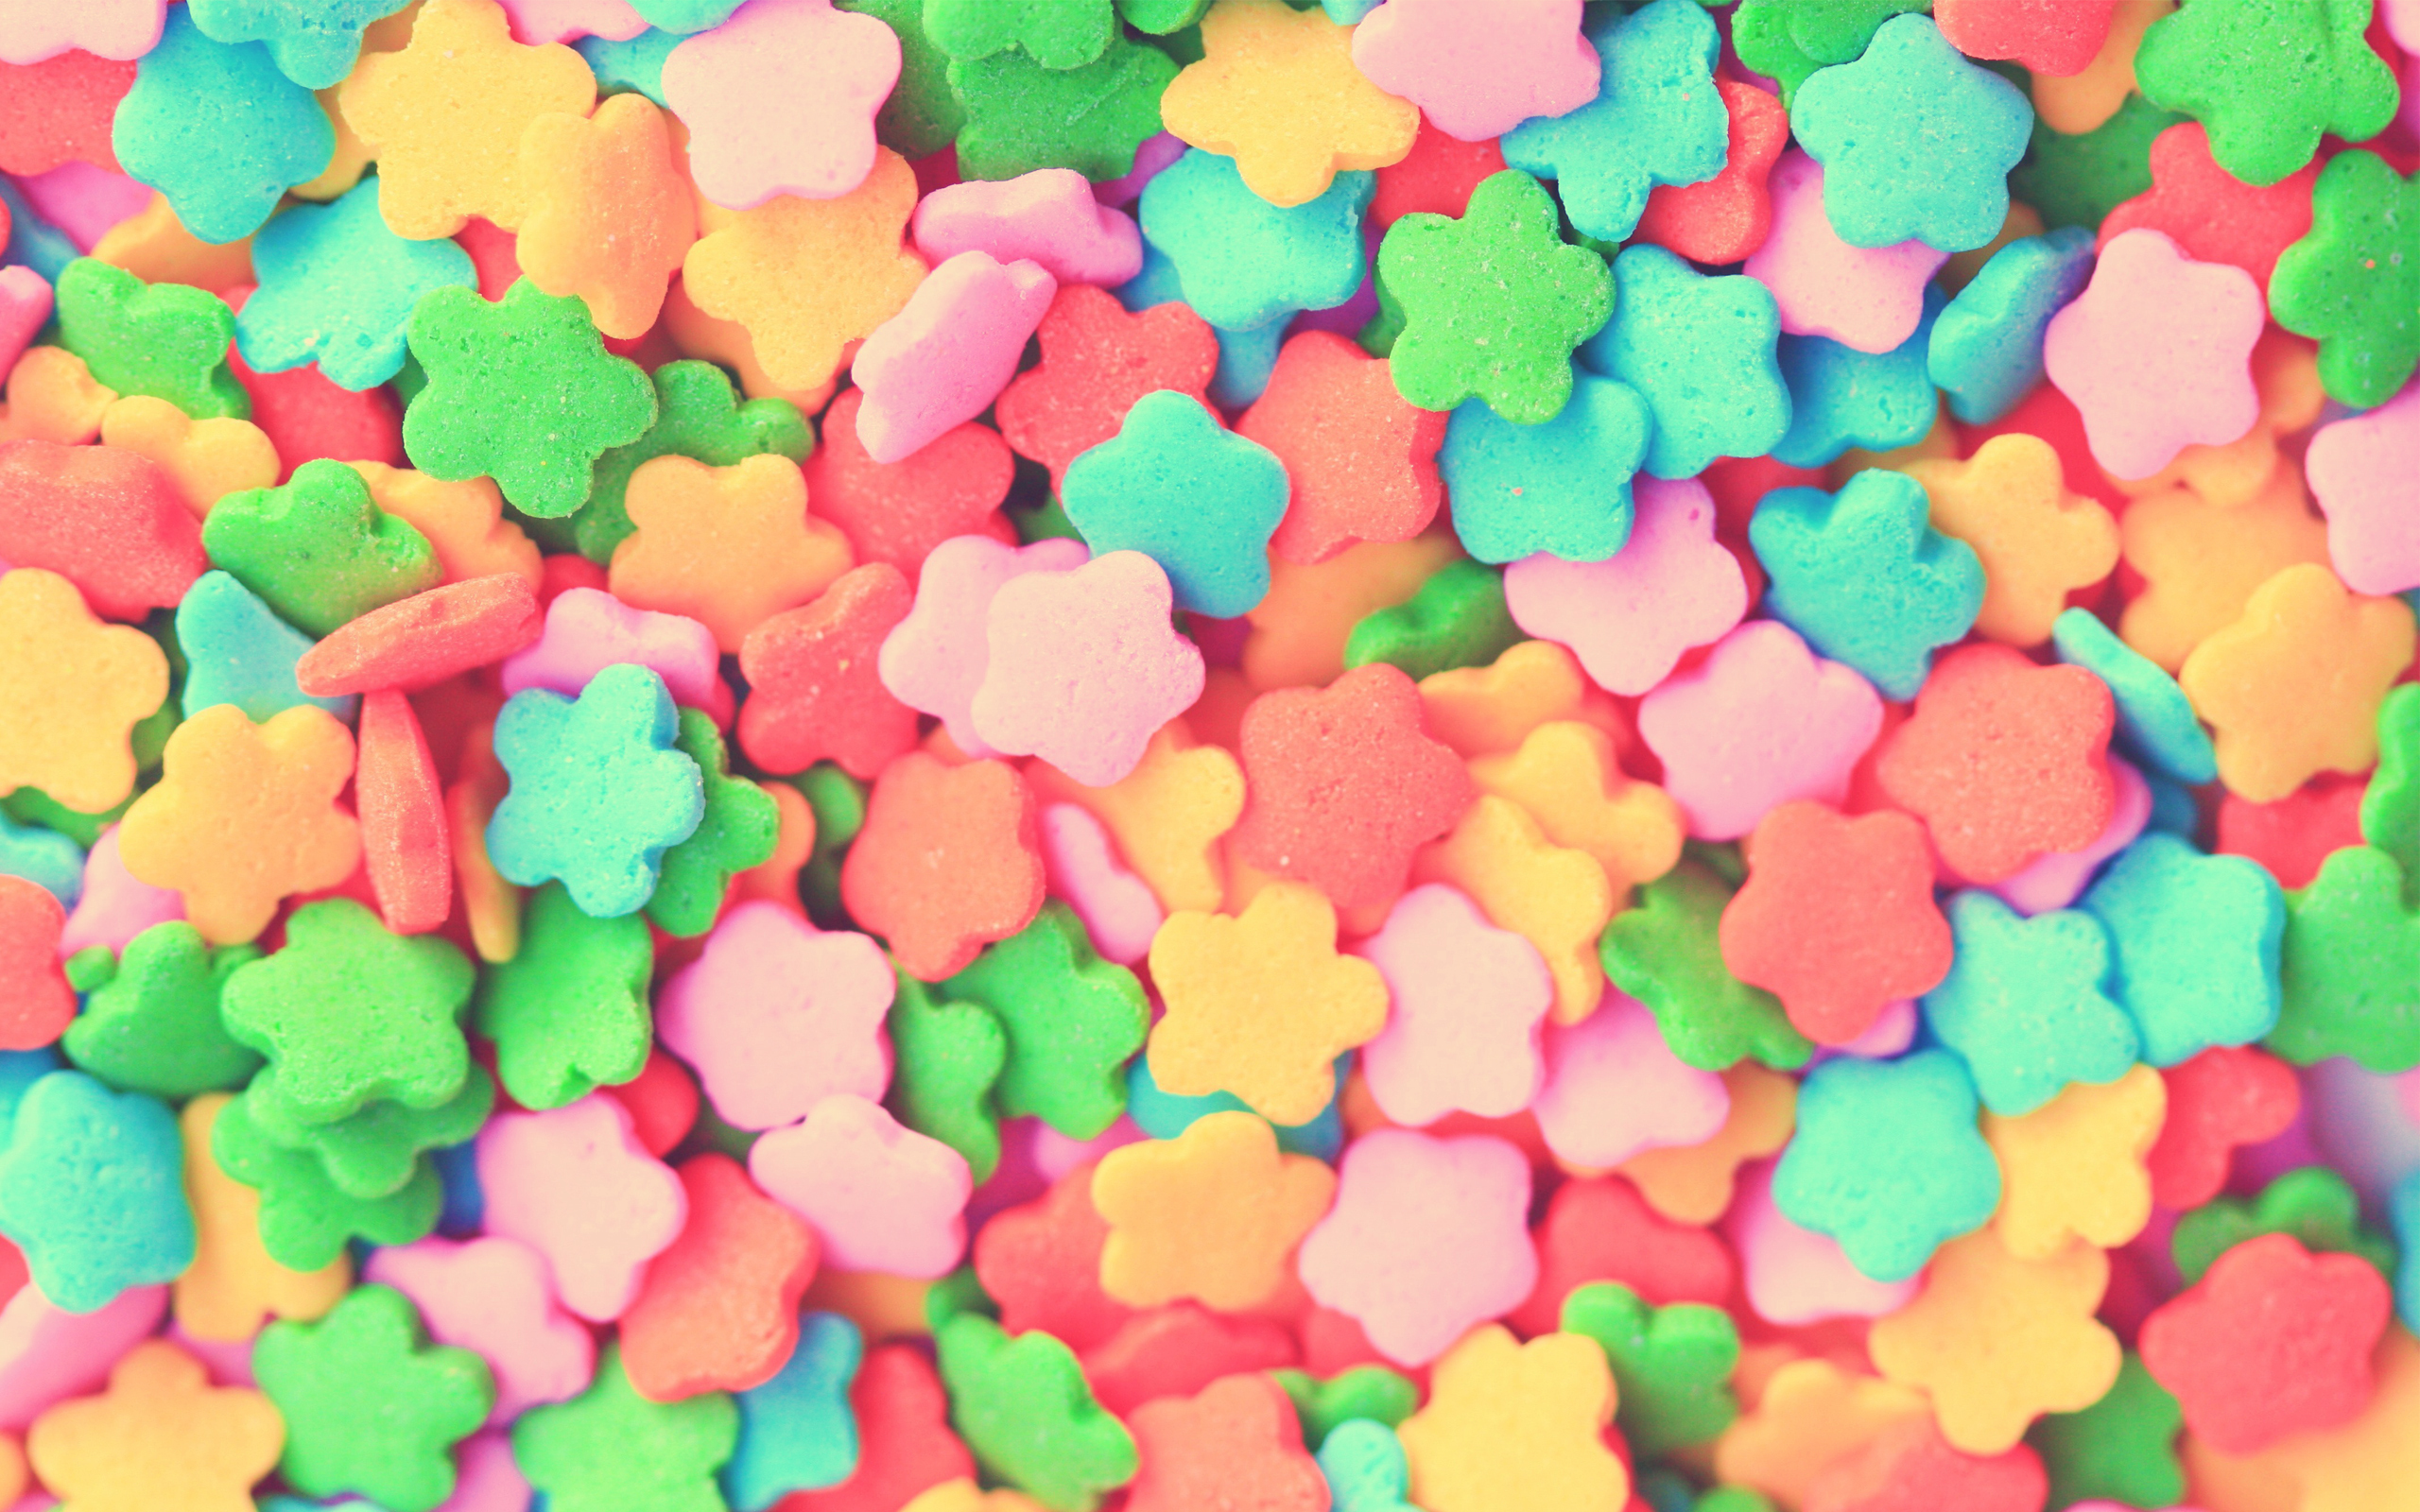 Candy Computer Wallpapers, Desktop Backgrounds | 2560x1600 | ID:326990